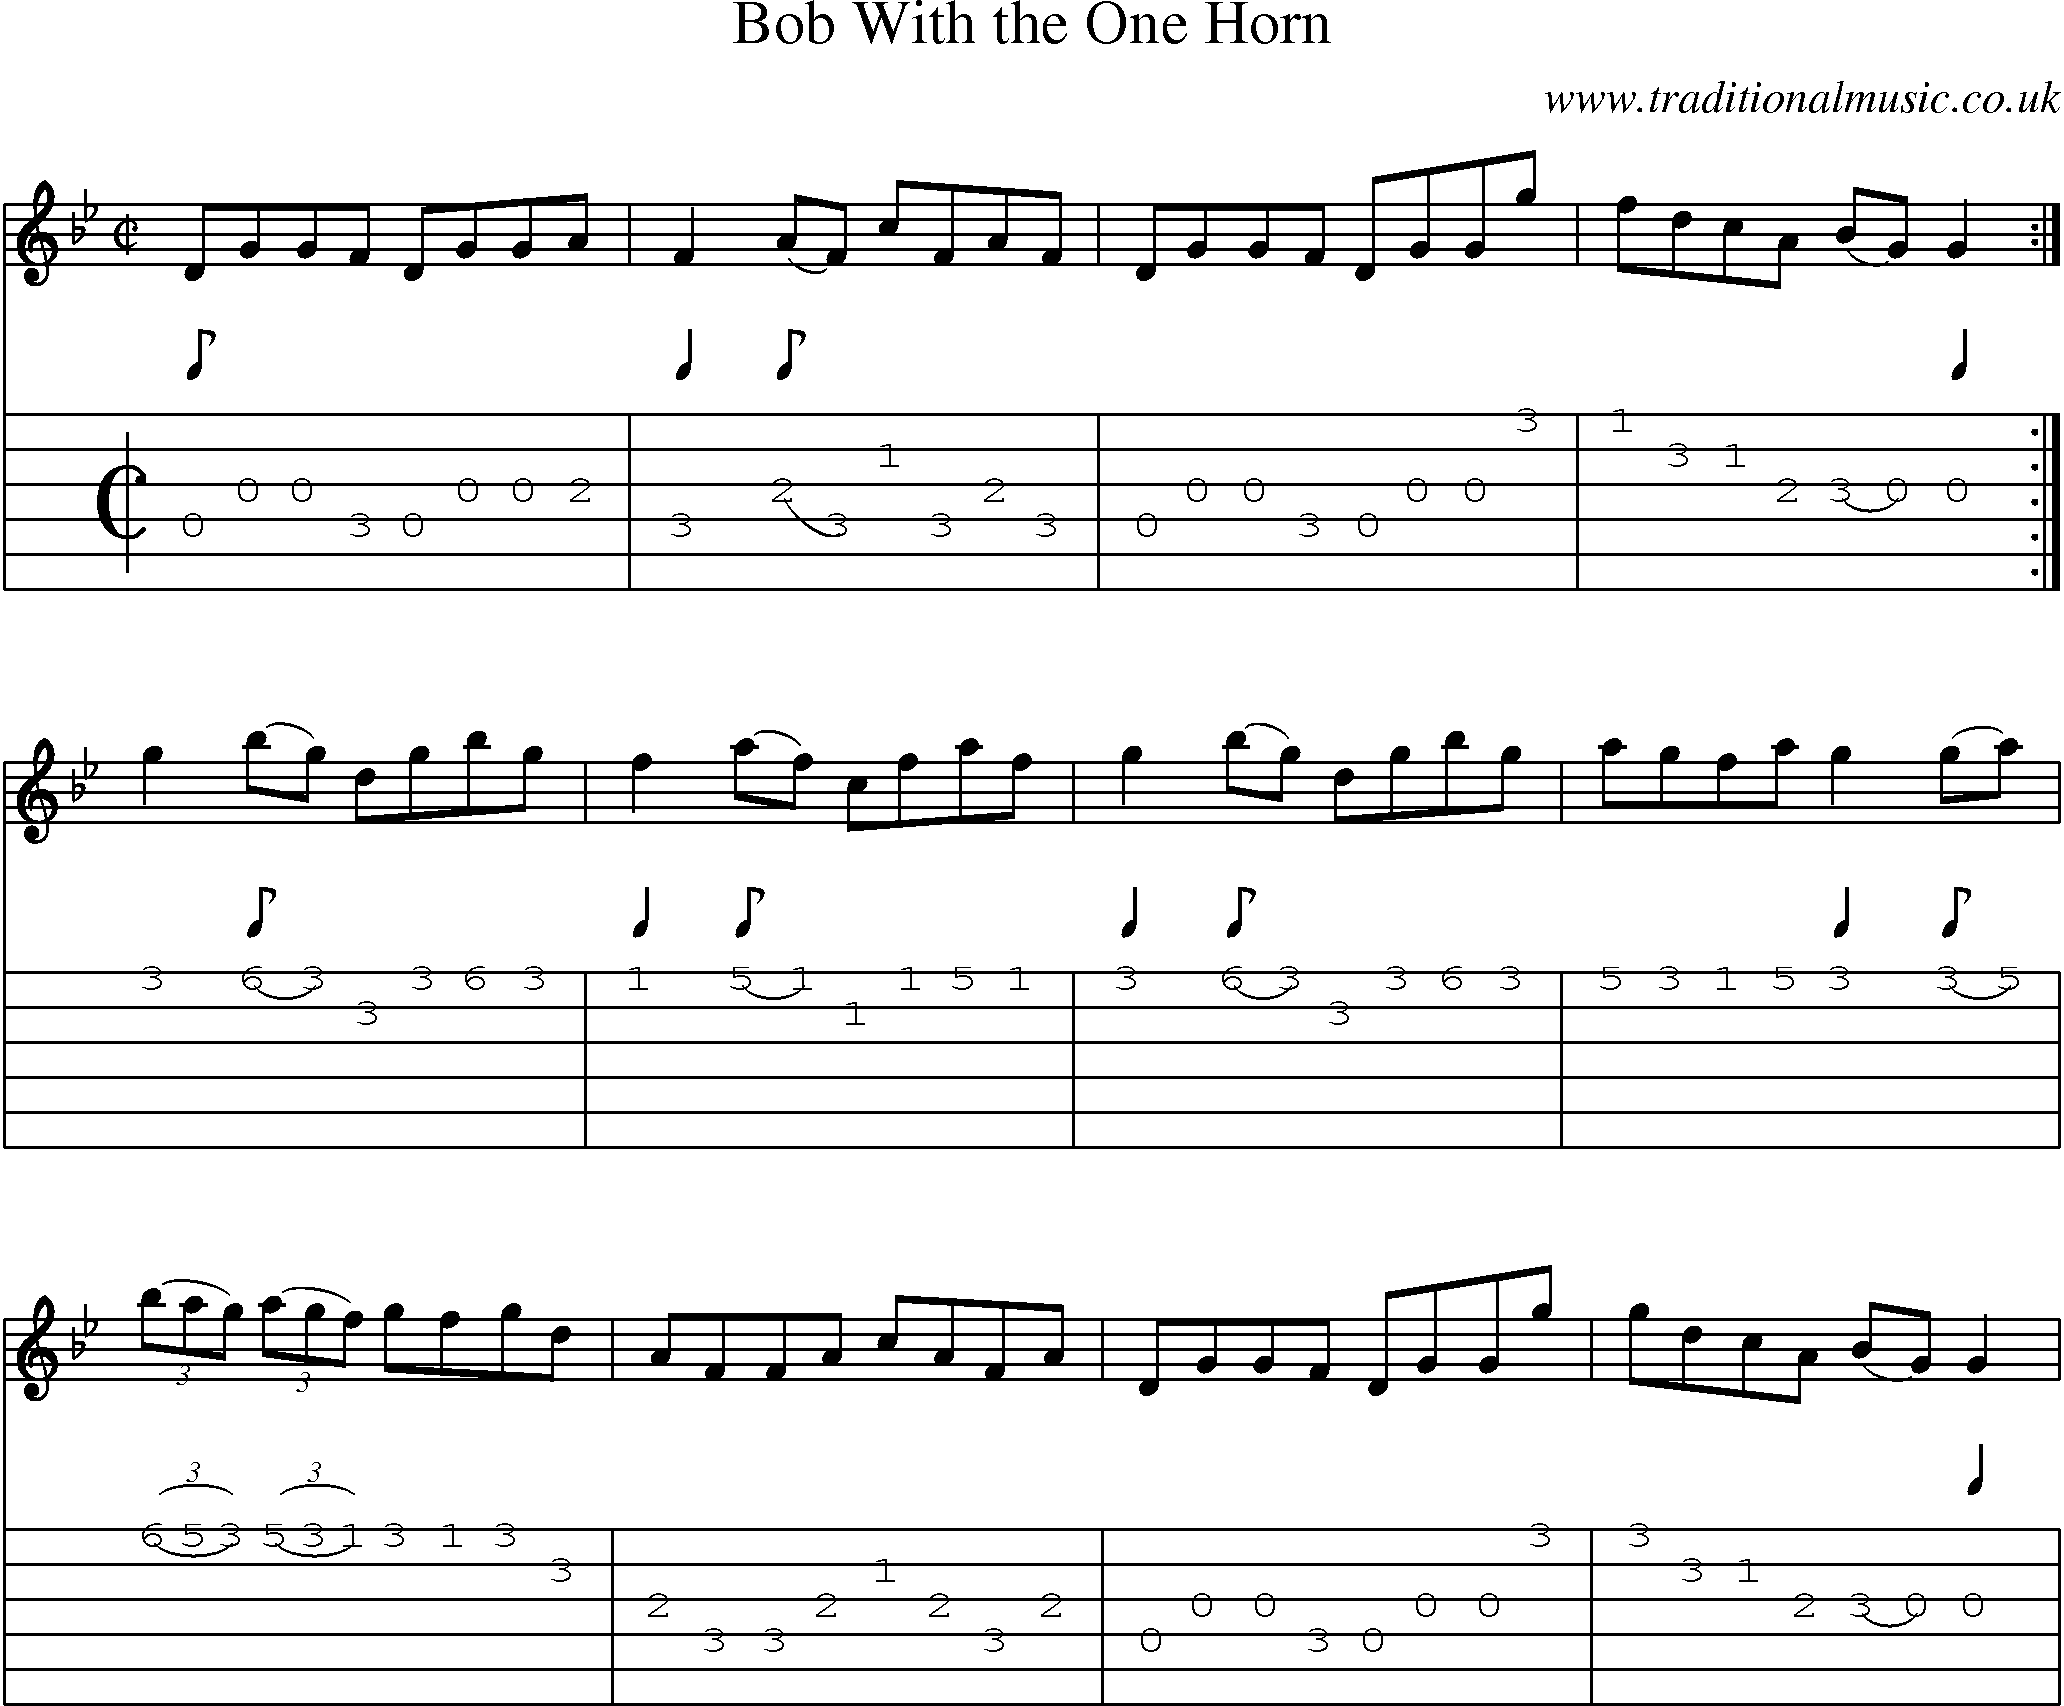 Music Score and Guitar Tabs for Bob With One Horn